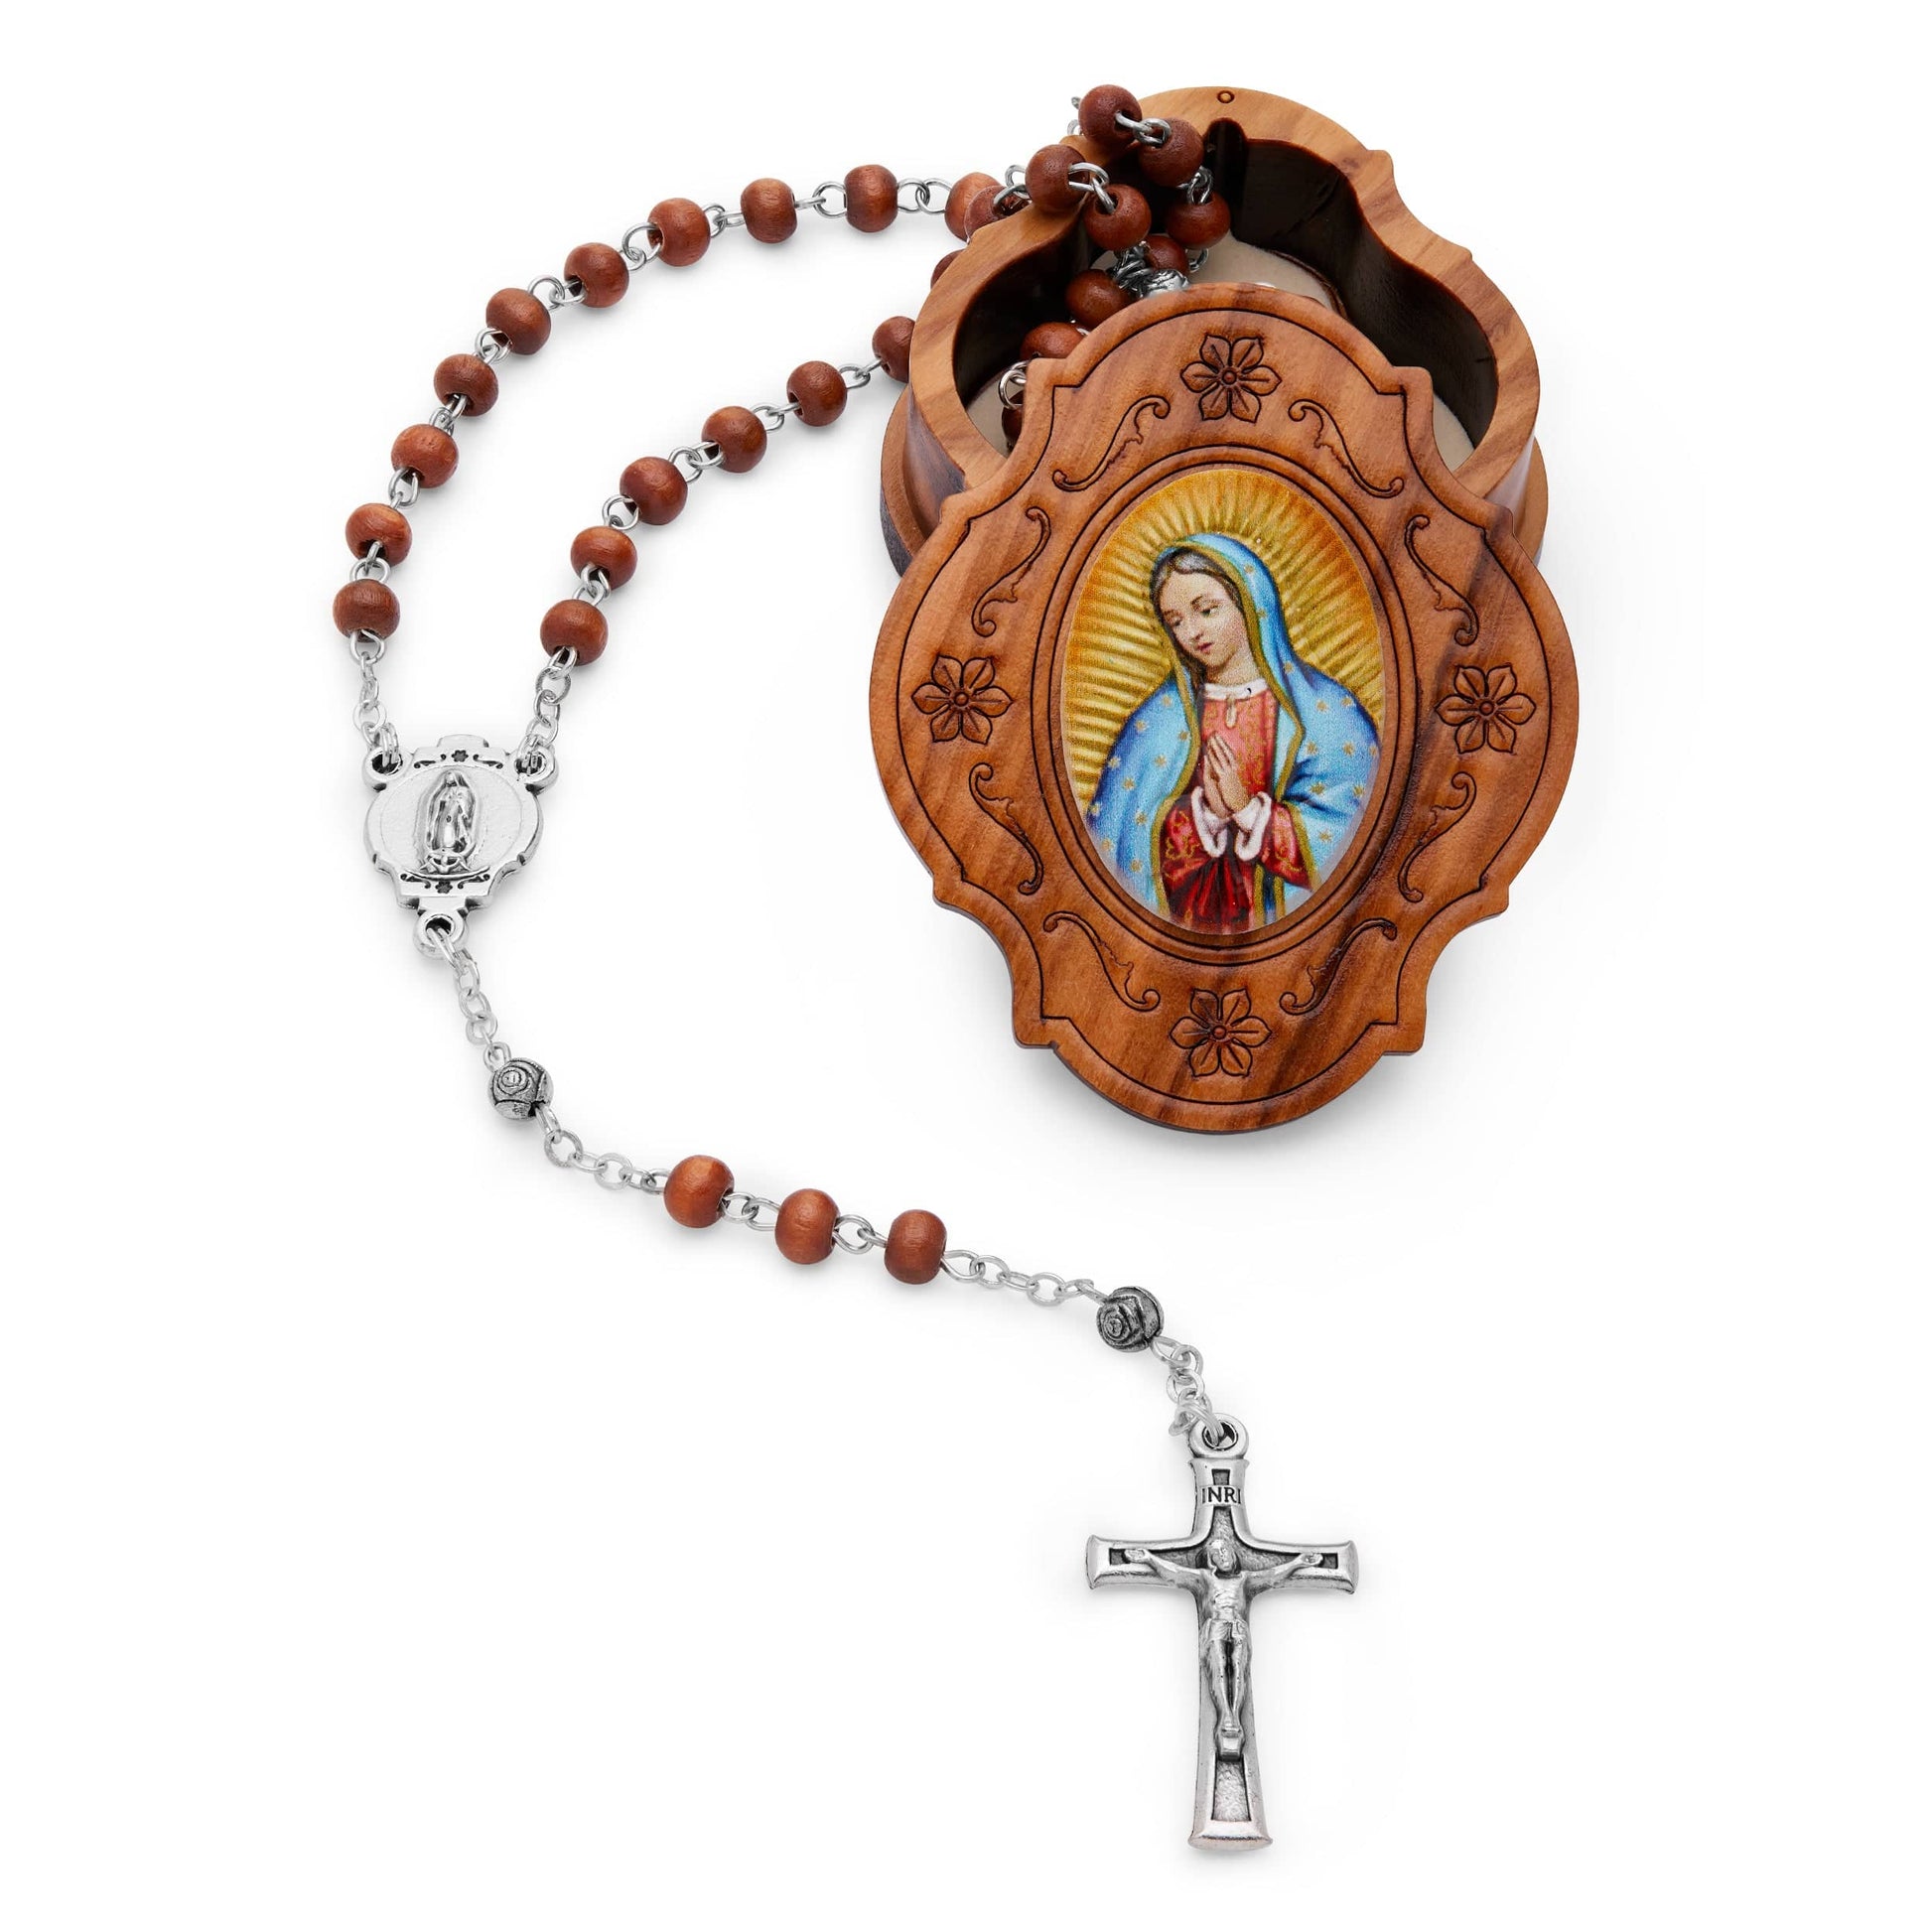 MONDO CATTOLICO Prayer Beads 38 cm (14.96 in) / 4 mm (0.16 in) Olive Wood Tiny Box and Rosary of Our Lady of Guadalupe